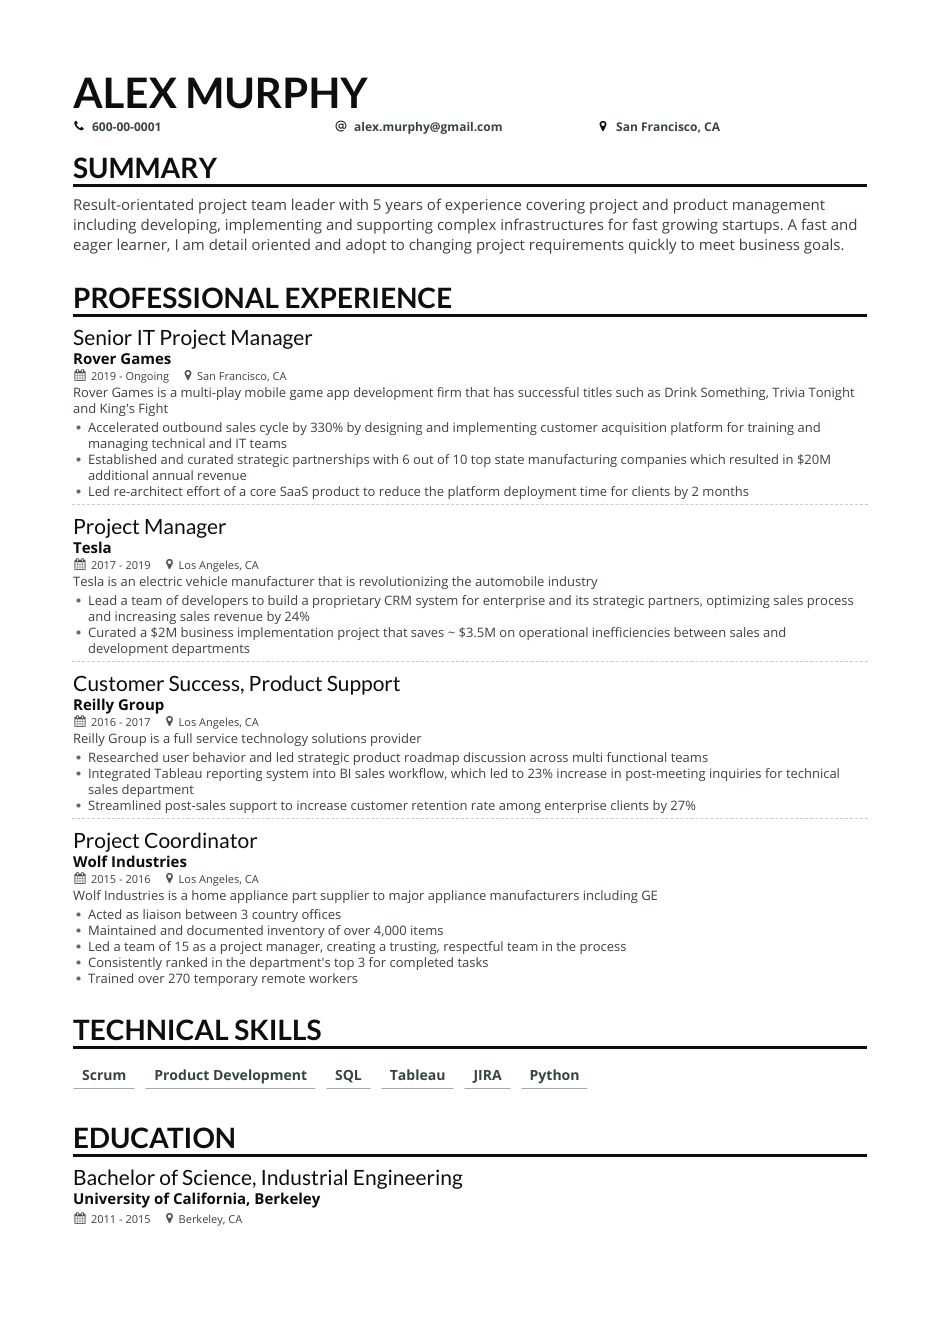 Civil Project Manager Resume Sample India 4 Job-winning Project Manager Resume Examples In 2021